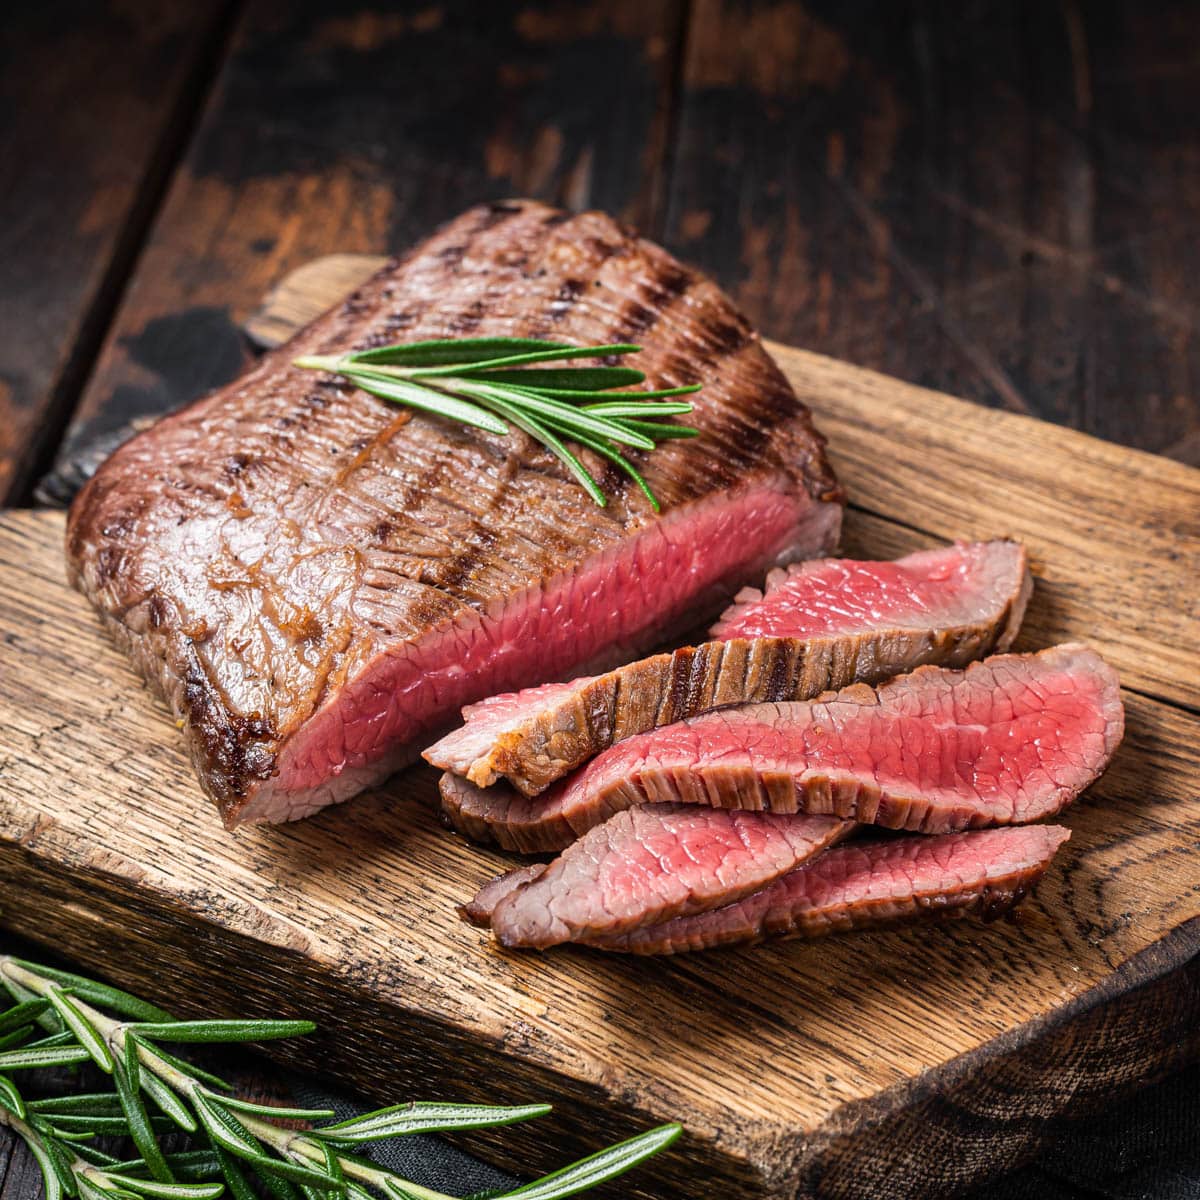 Grilled medium rare flank steak on a rustic wooden cutting board with a sprig of rosemary.